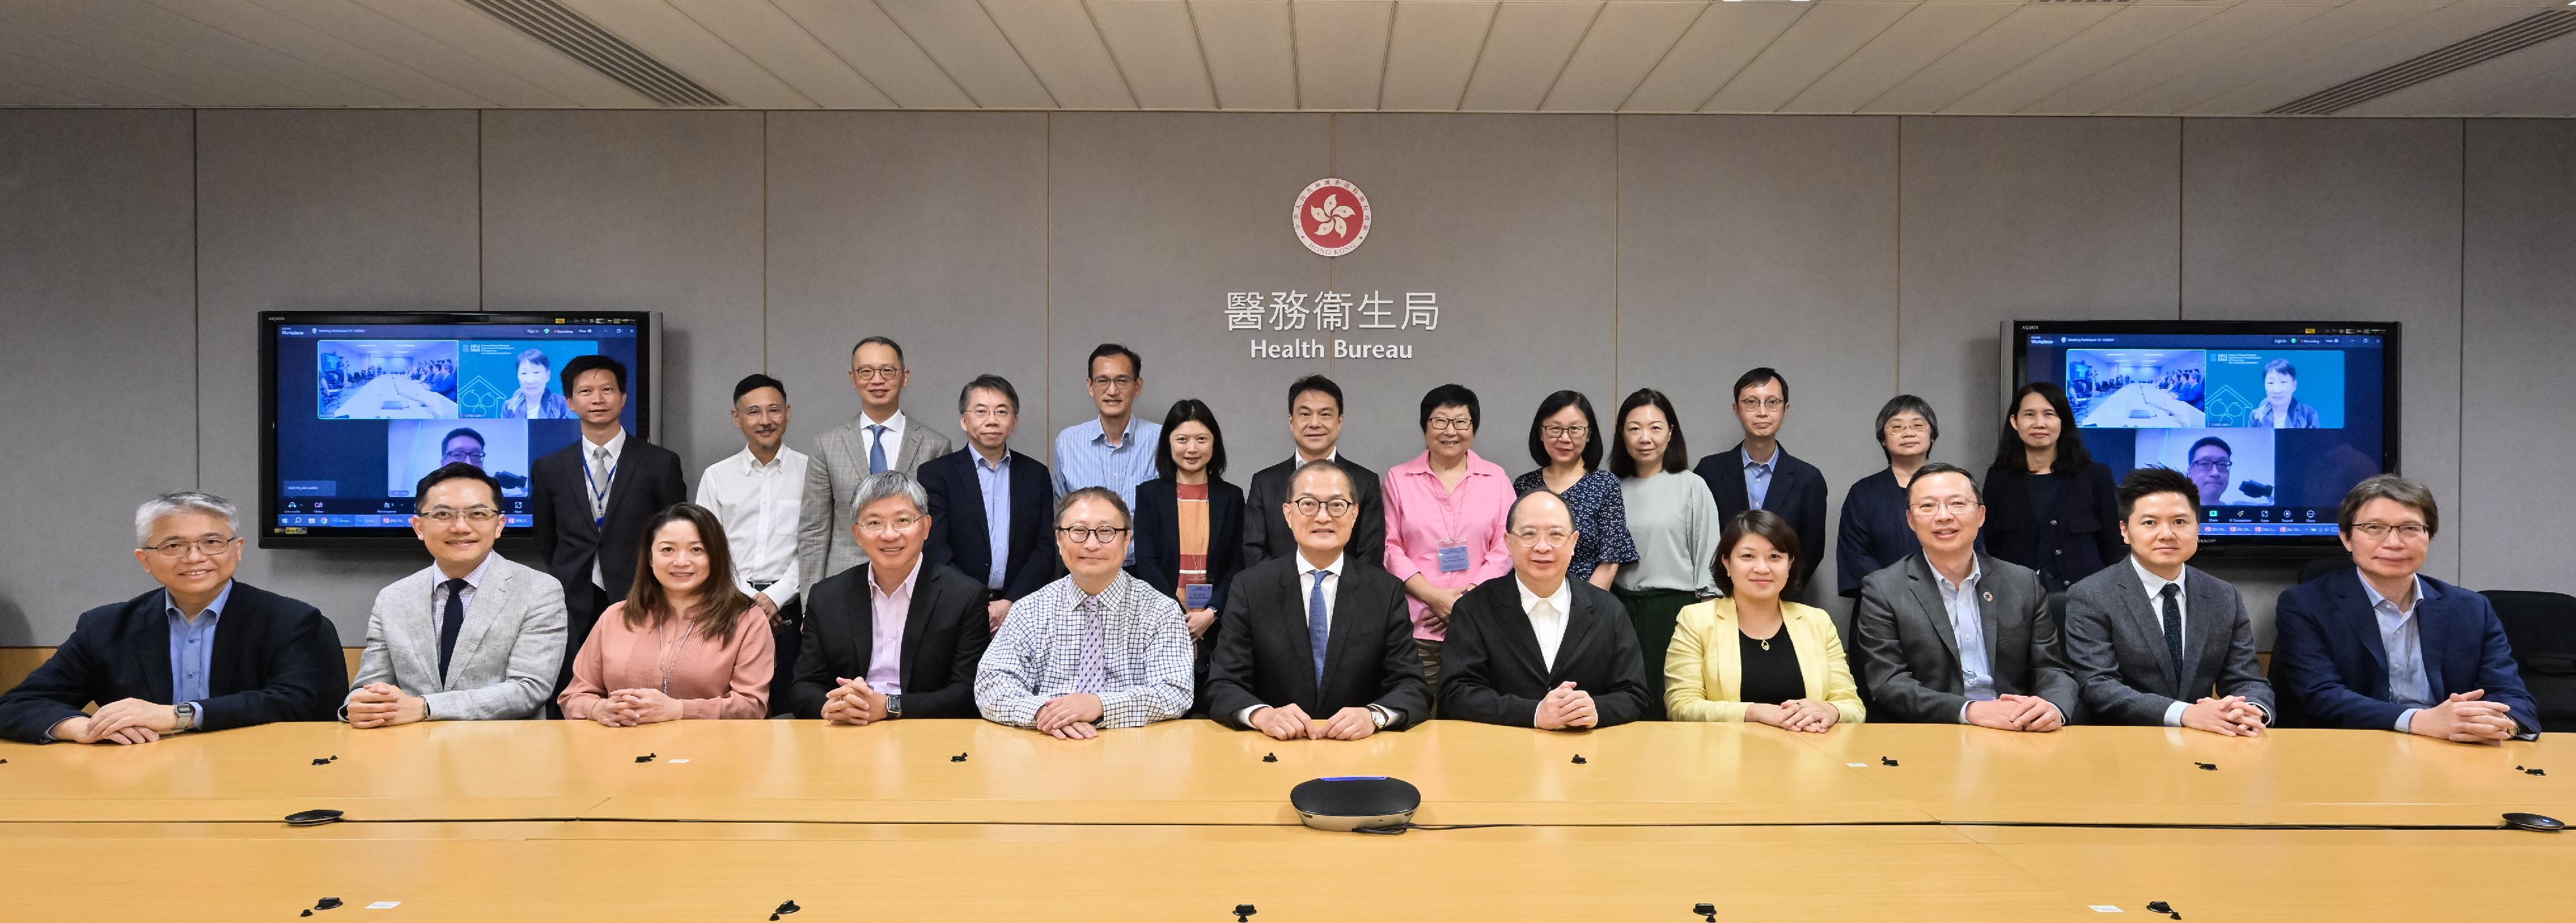 The Secretary for Health, Professor Lo Chung-mau, chaired the 19th meeting of the Cancer Coordinating Committee today (June 28) to review the implementation of the Hong Kong Cancer Strategy and discuss response strategies and measures with relevant Government departments and organisations. Photo shows Professor Lo (front row, centre); the Permanent Secretary for Health, Mr Thomas Chan (front row, fourth left); the Under Secretary for Health, Dr Libby Lee (front row, fourth right); the Director of Health, Dr Ronald Lam (front row, second left), and members before the meeting.